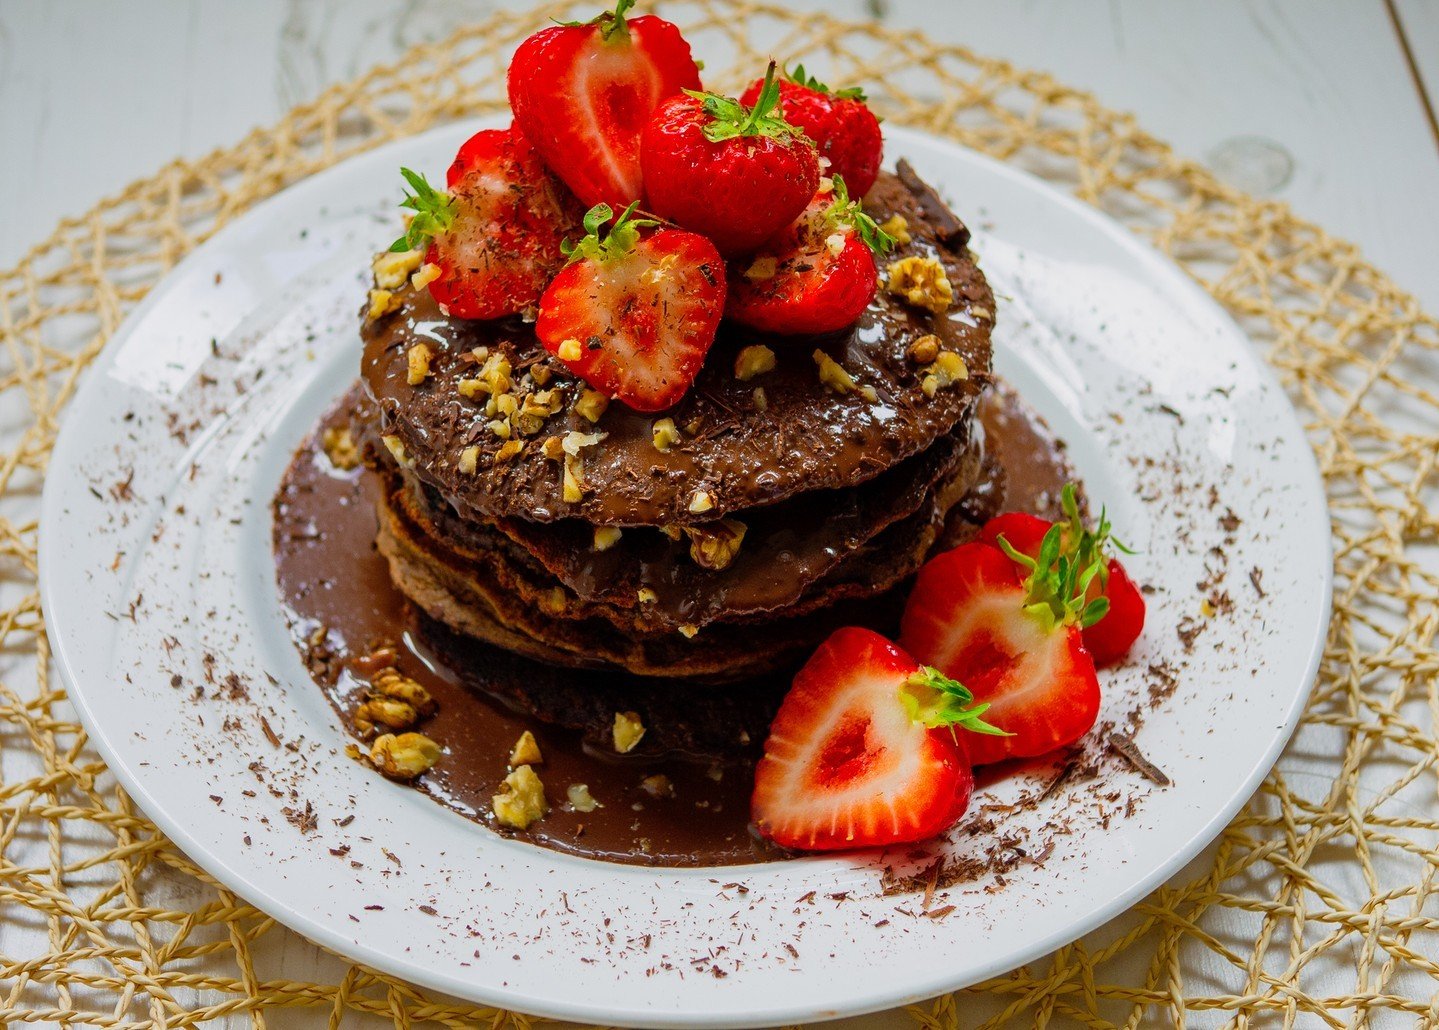 𝐂𝐡𝐨𝐜𝐨𝐥𝐚𝐭𝐞 𝐛𝐫𝐨𝐰𝐧𝐢𝐞 𝐩𝐚𝐧𝐜𝐚𝐤𝐞𝐬

GLUTEN FREE II DAIRY FREE II SOY FREE  II VEGAN

This recipe is so incredibly indulgent you would find it hard to believe it&rsquo;s breakfast and not dessert. However, you could serve this with som